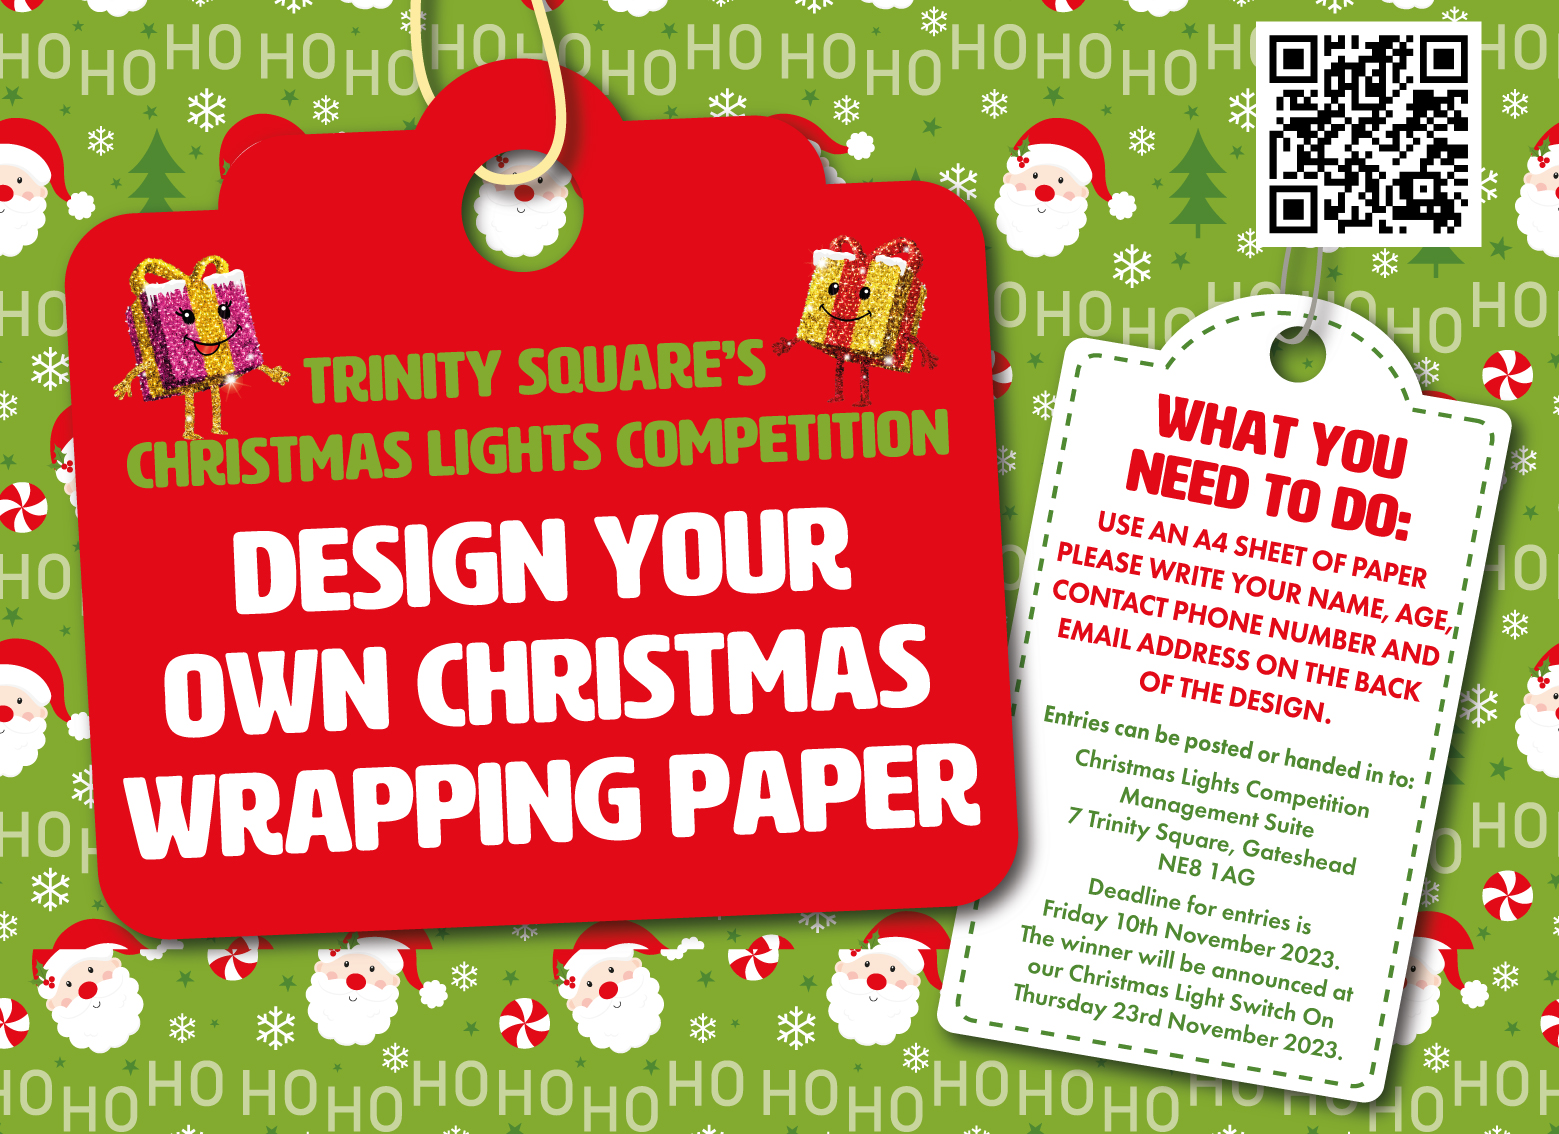 Design you own Christmas wrapping paper competition!